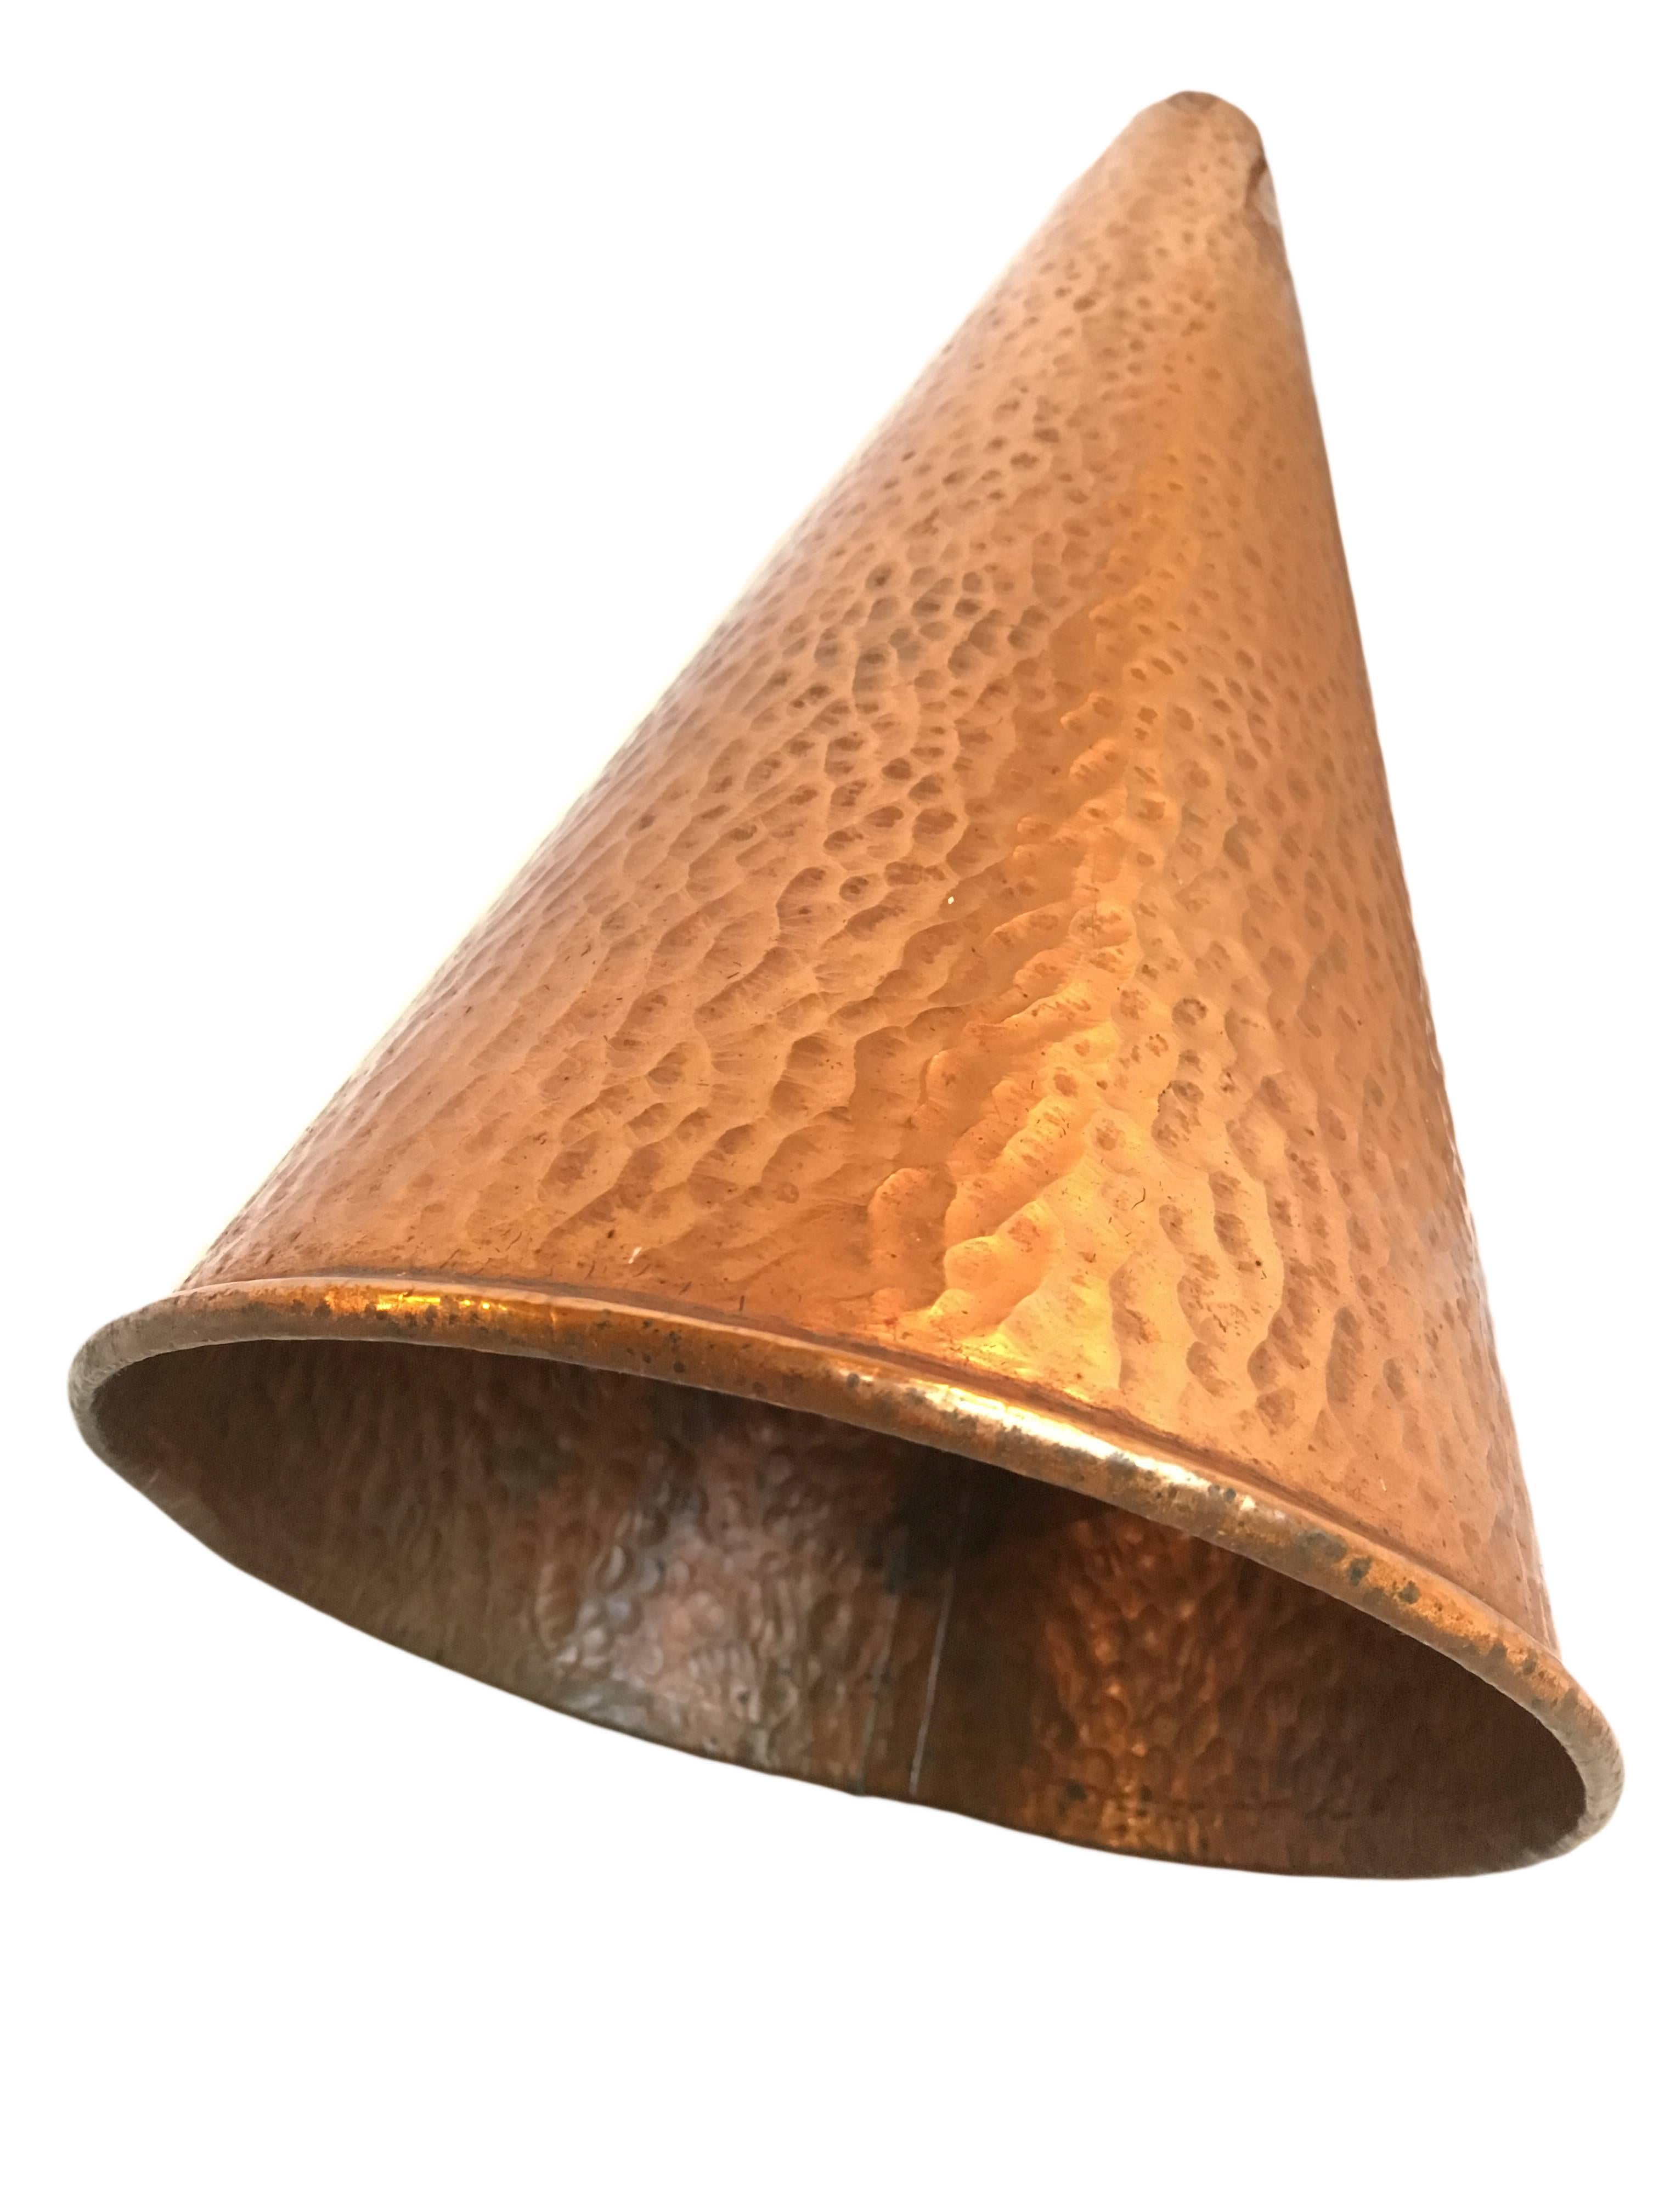 20th Century Hammered Copper Pendant Lights, a pair, Denmark. 